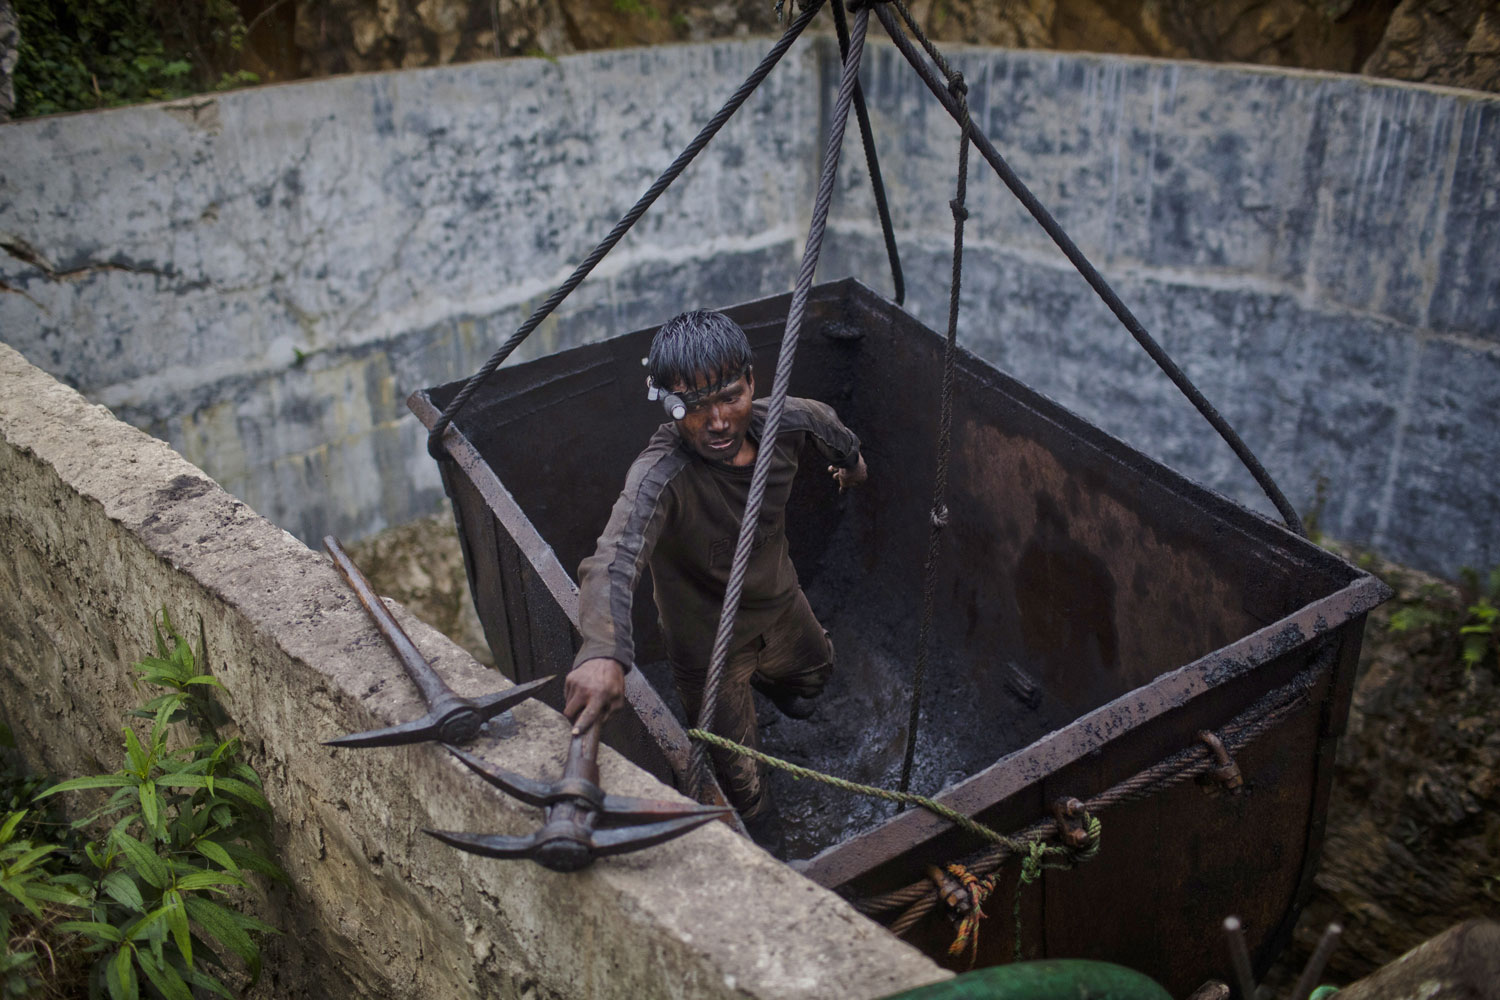 A miner unloads tools after being hoisted from the depths of a coal mine.